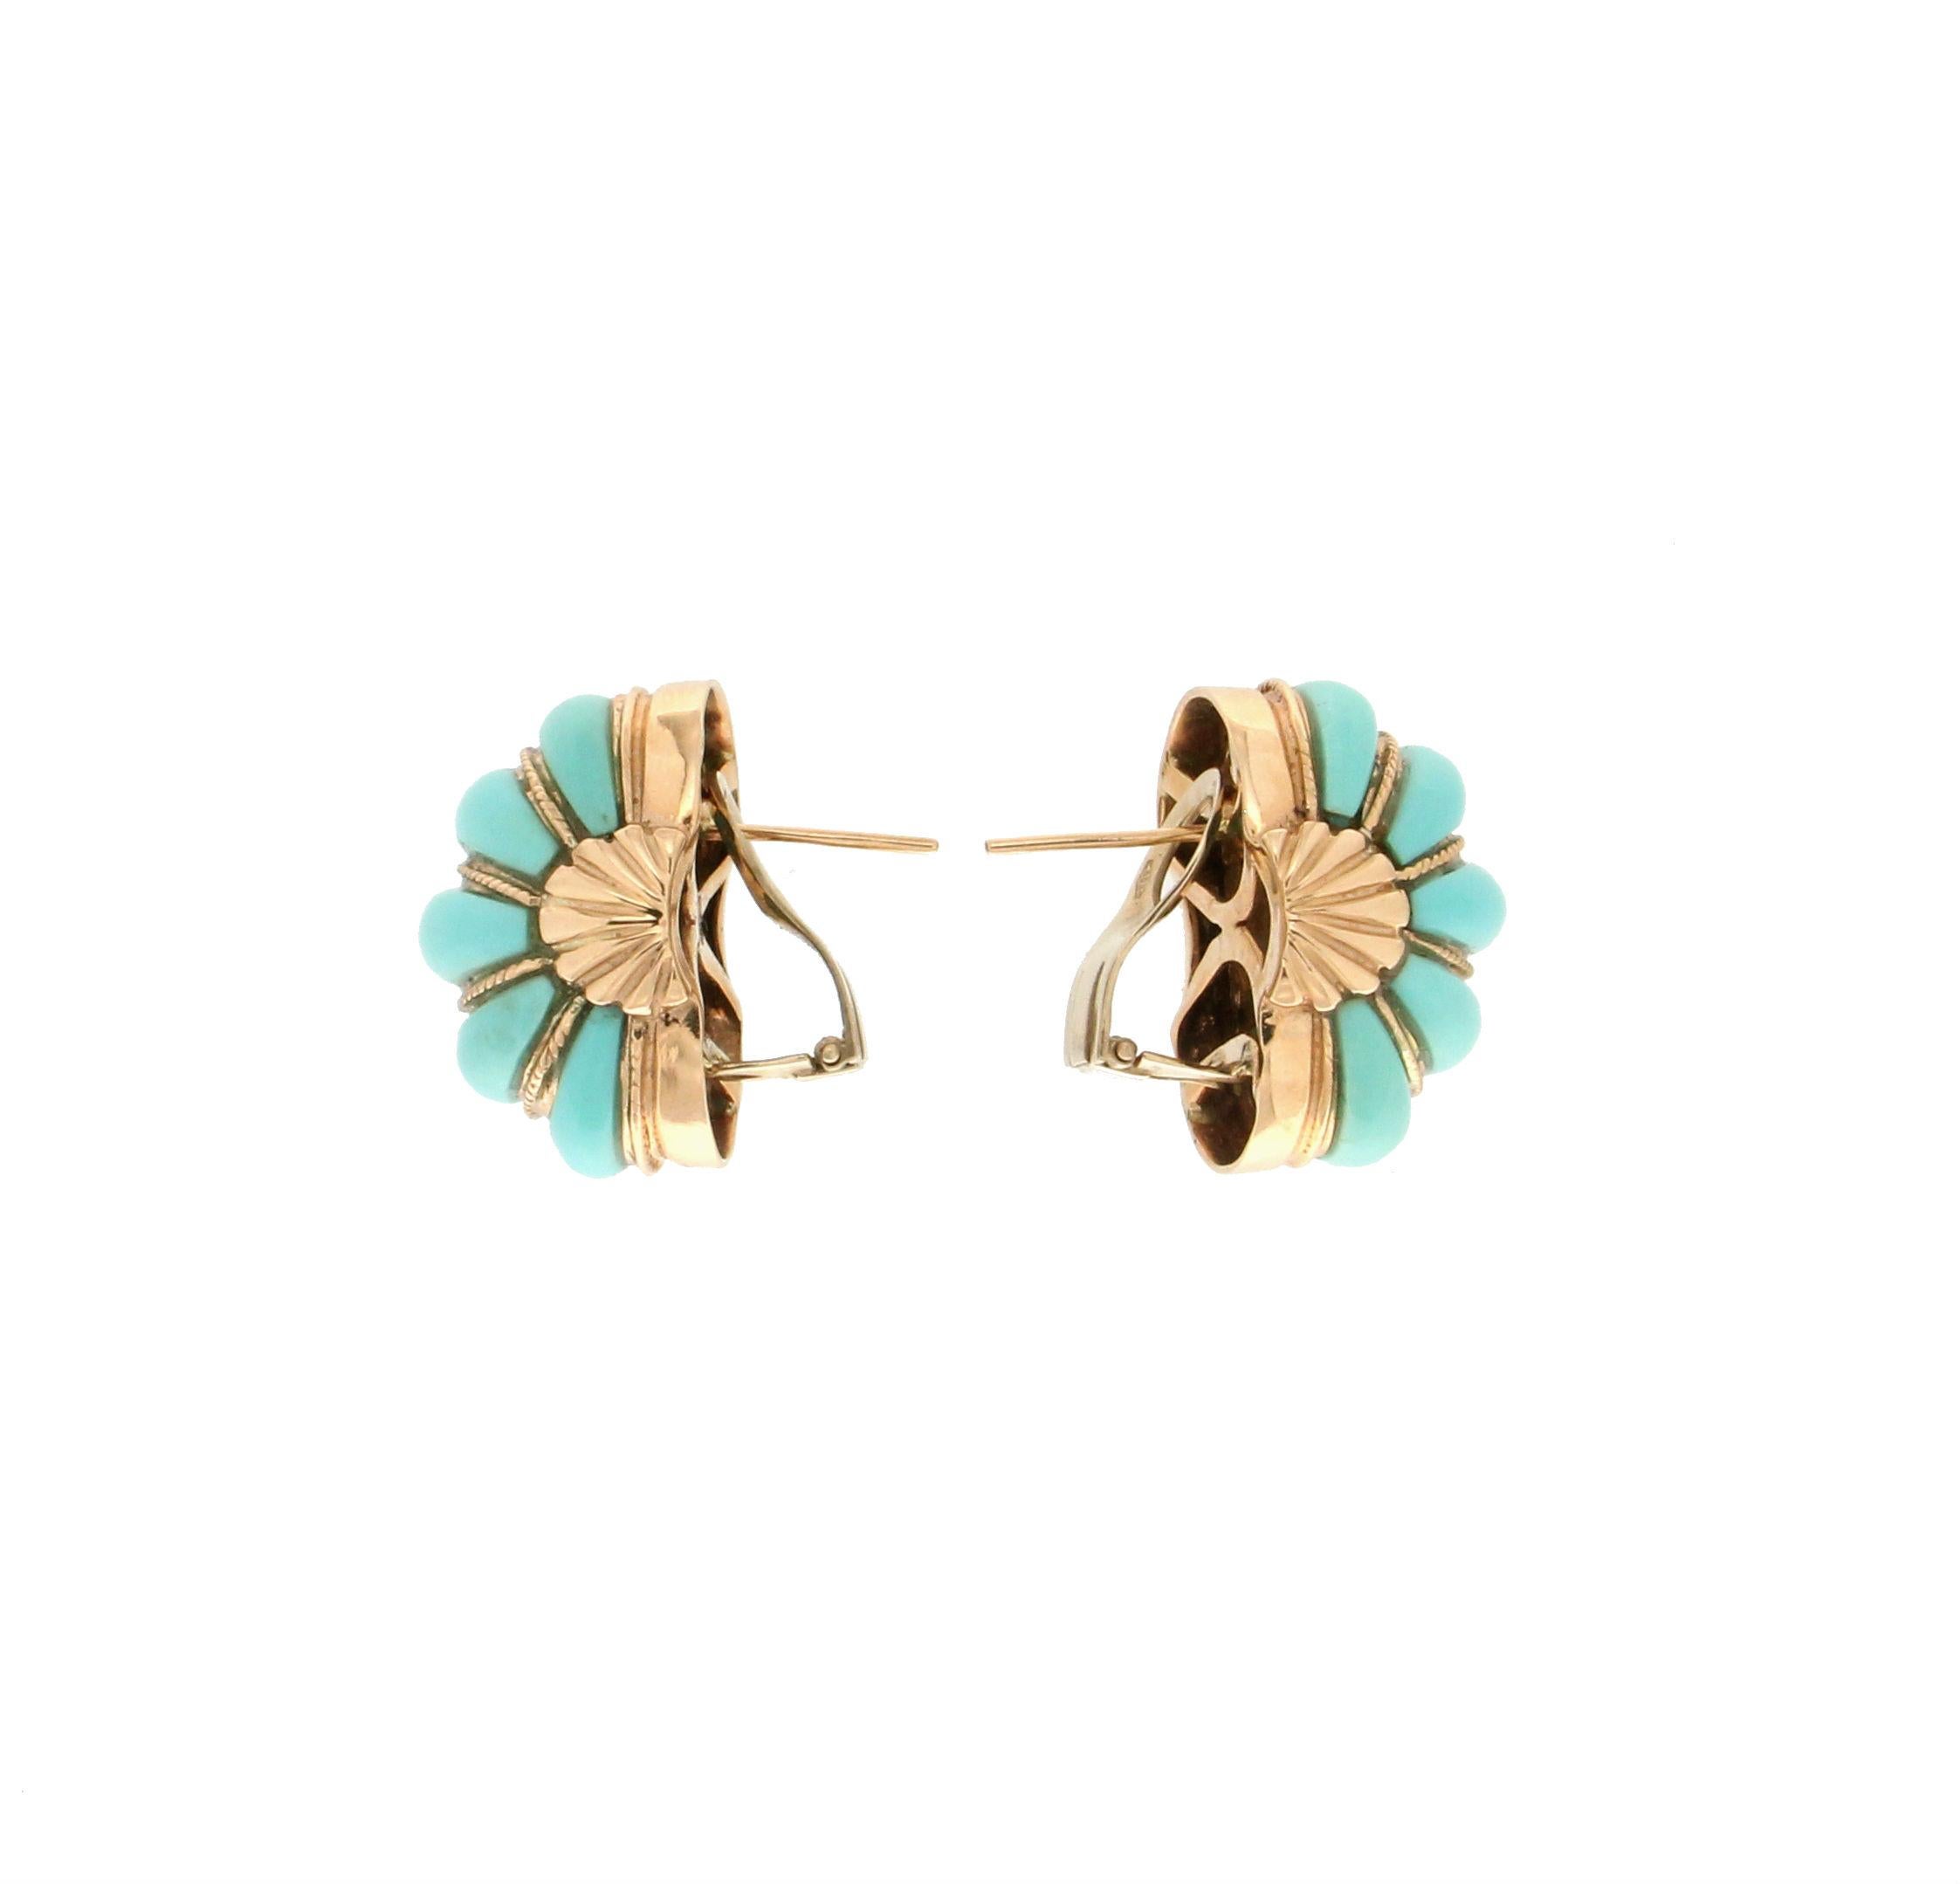 14 kt yellow gold earring completely handmade by our expert craftsmen mounted with turquoise.
Total weight of the Turquoise gr. 4.70
Total Earring Weight gr. 23,40
